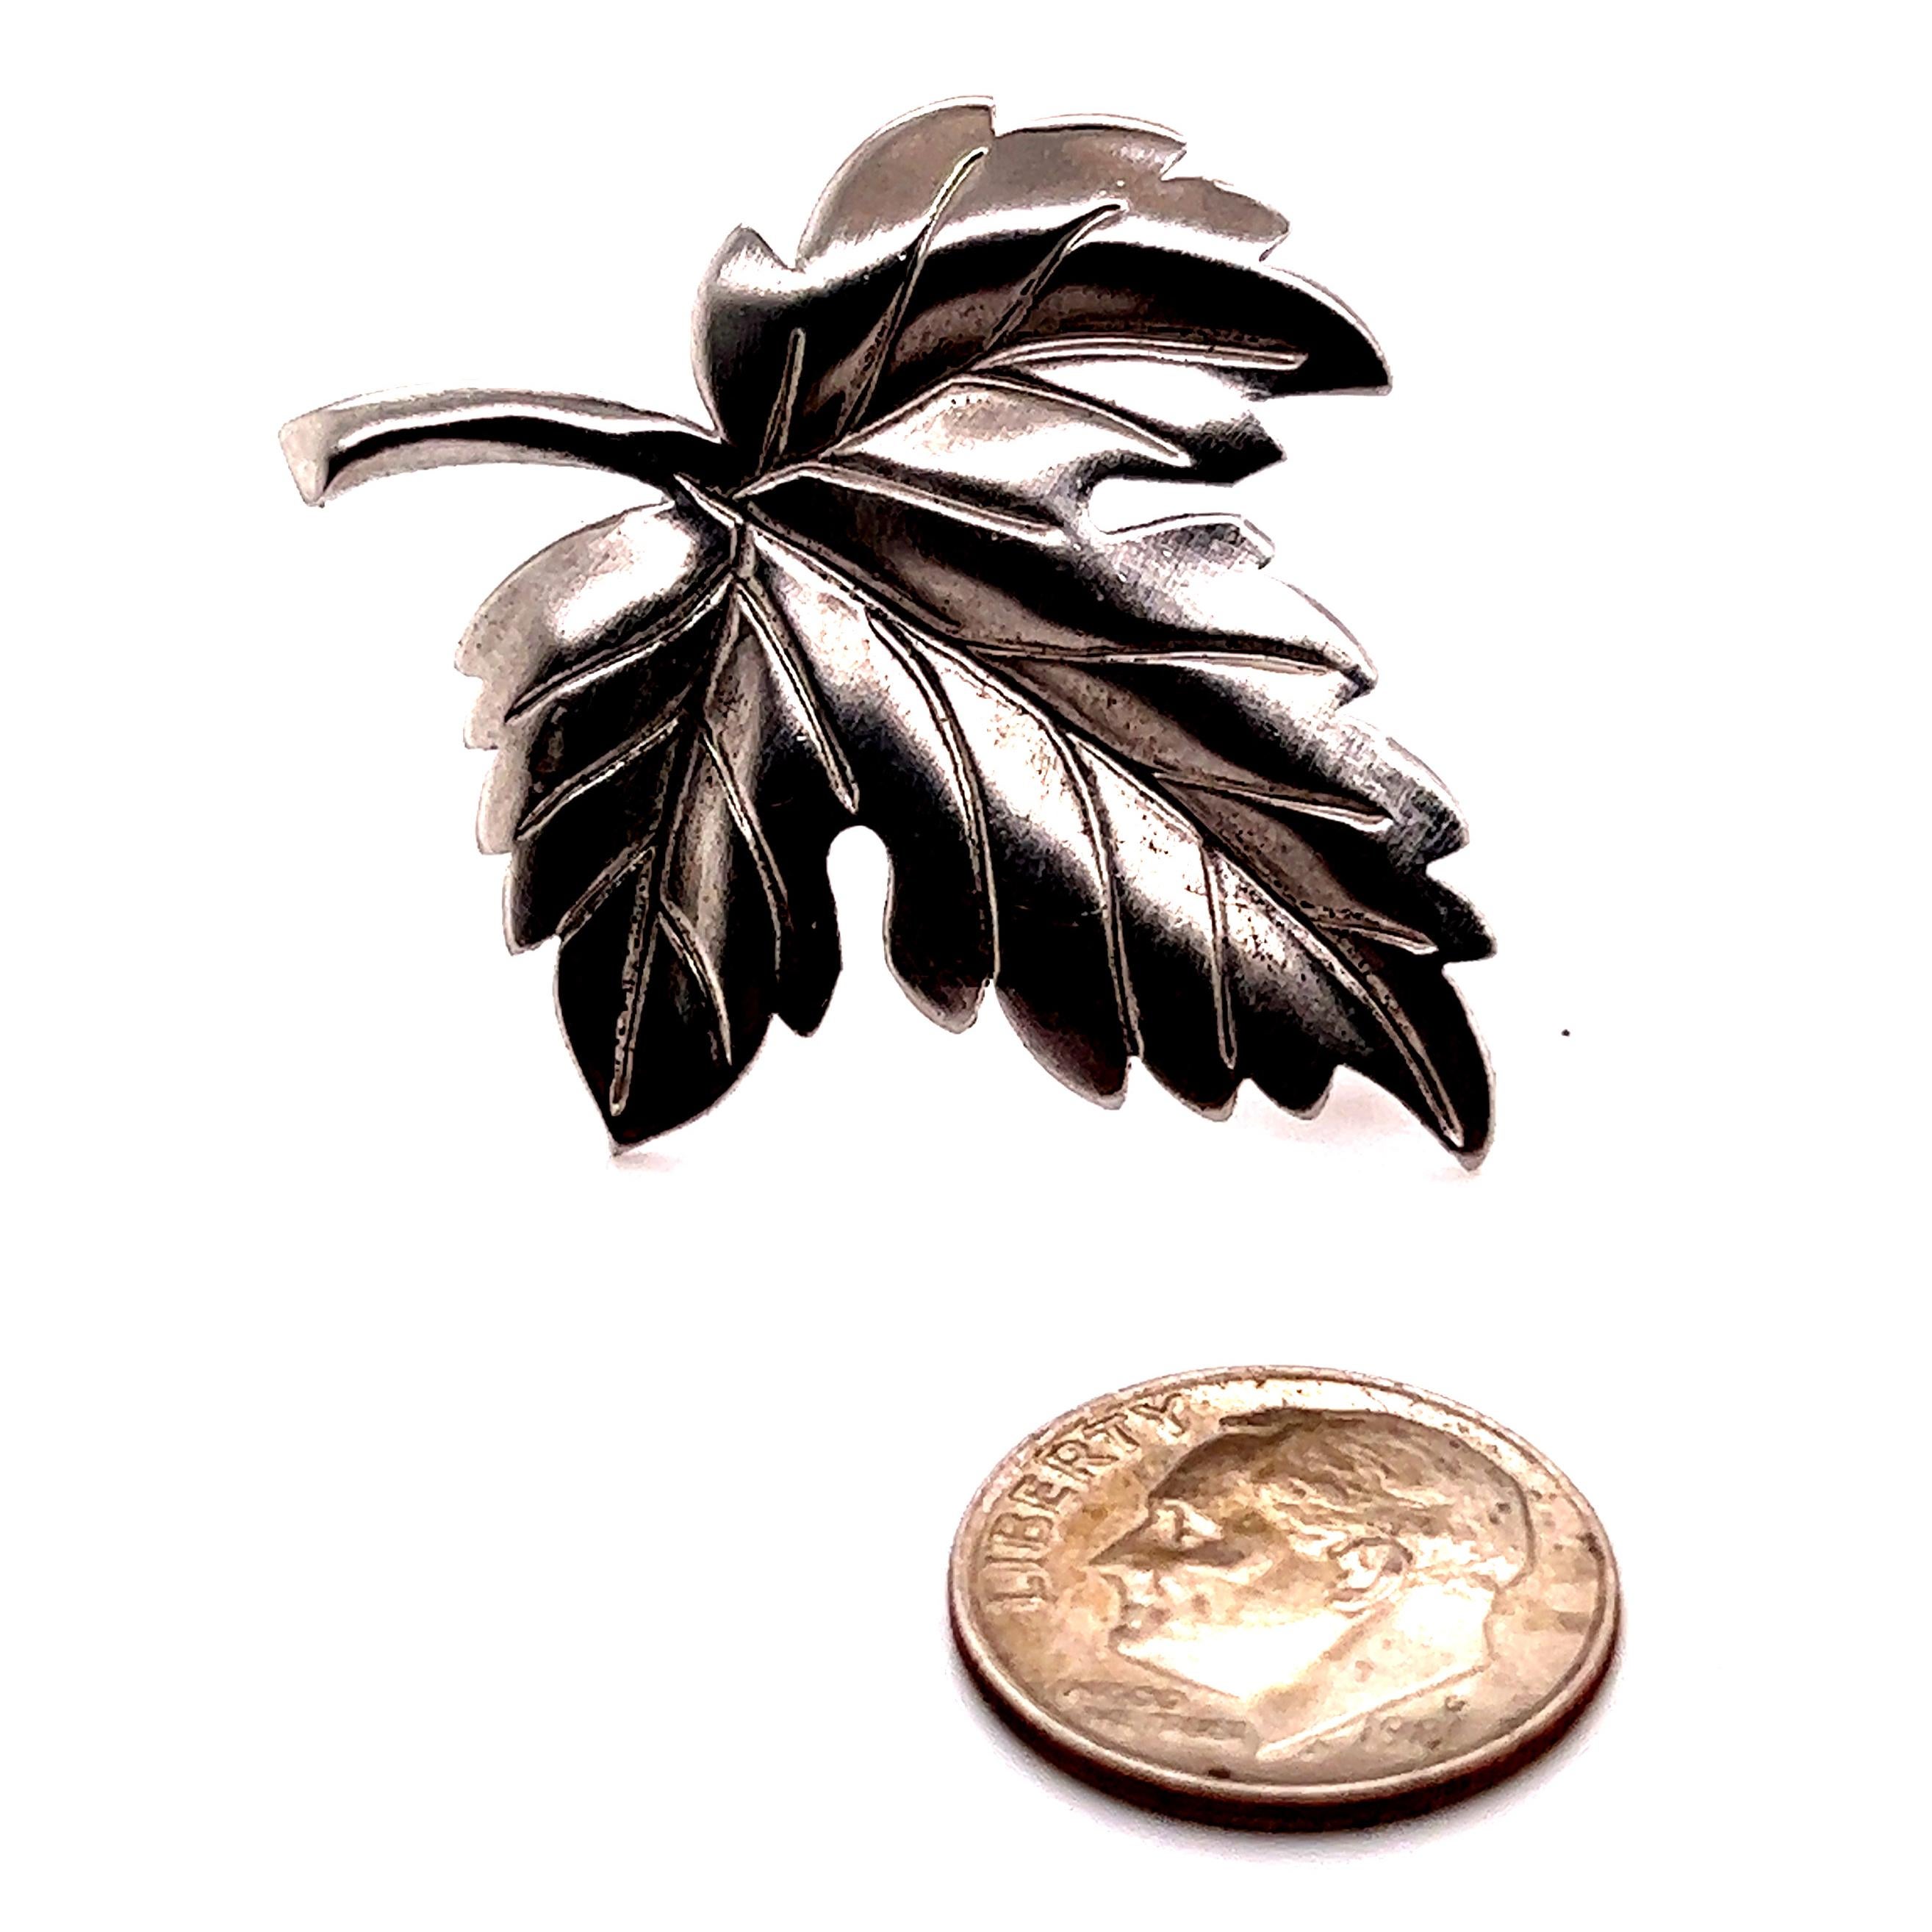 Tiffany & Co Estate Leaf Brooch Pin Sterling Silver 7 Grams In Good Condition For Sale In Brooklyn, NY